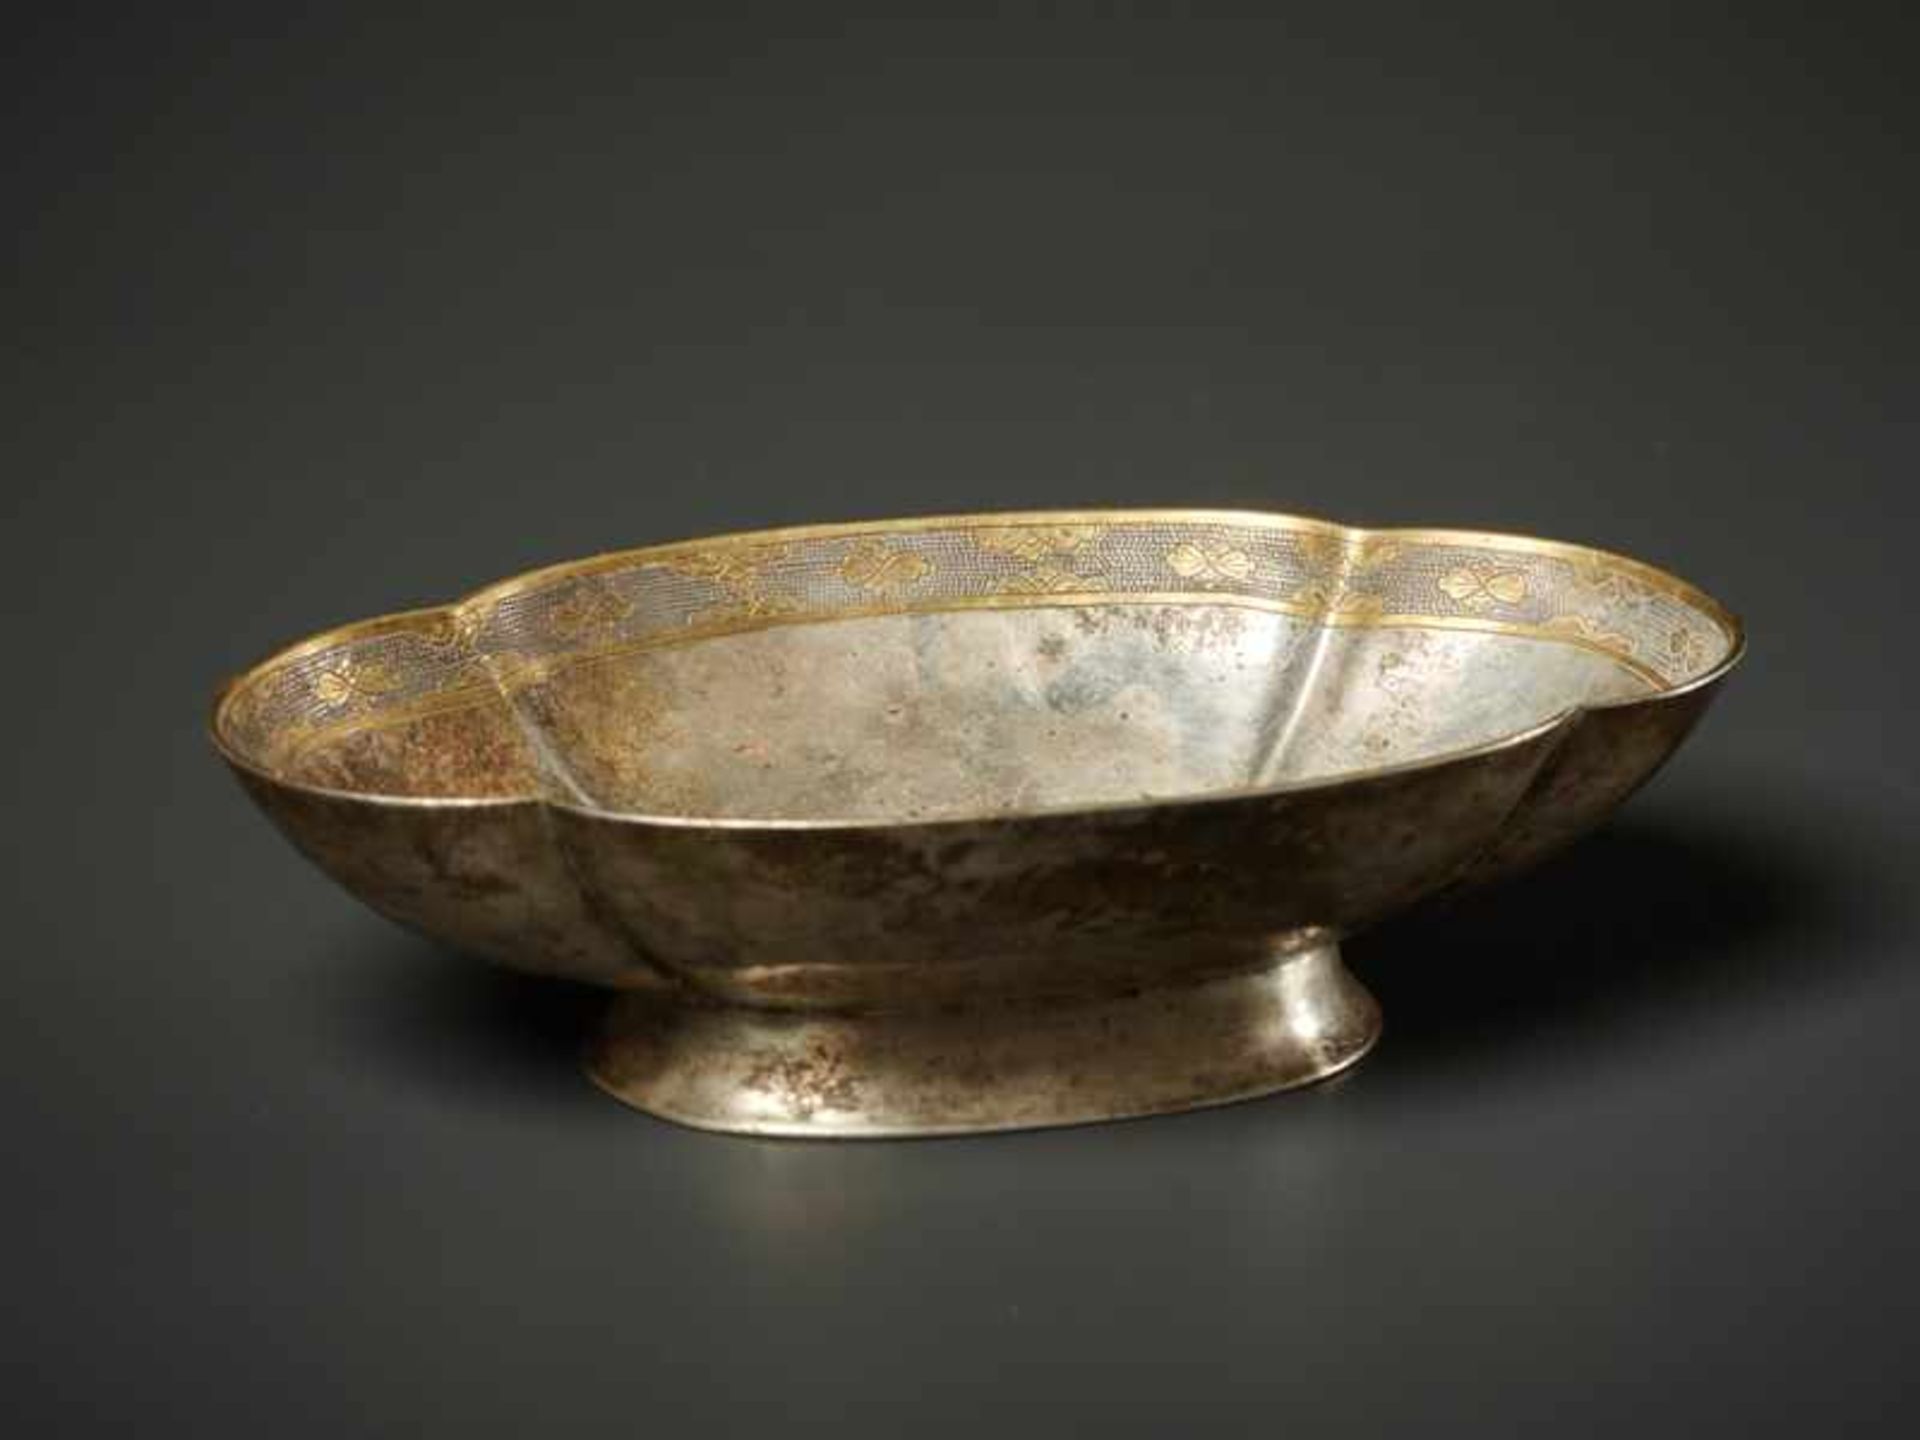 BOWL WITH FISH-DRAGON DECOR Silver and gilding. China, probably Tang-dynasty (618 - 907)Powerful, - Image 2 of 4